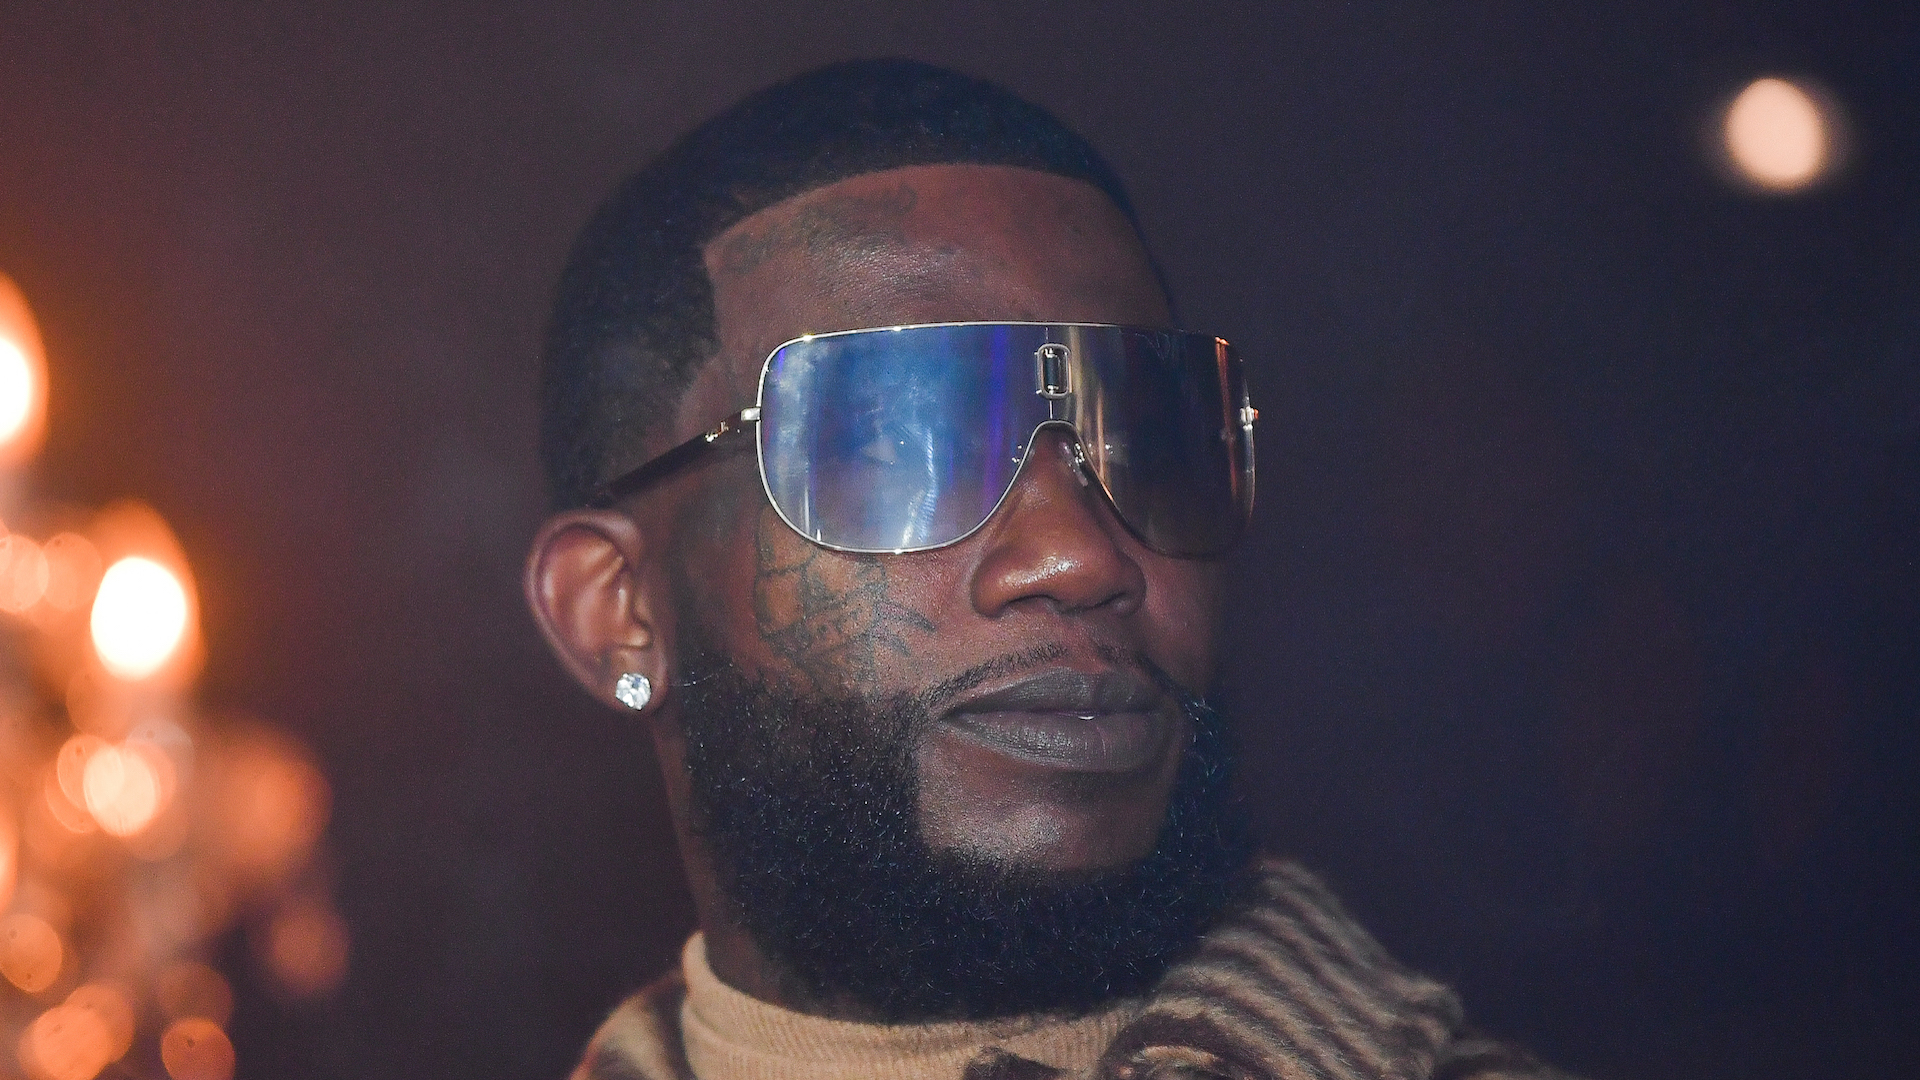 Jeezy and Gucci Mane to Face Off in Verzuz Battle After Feud